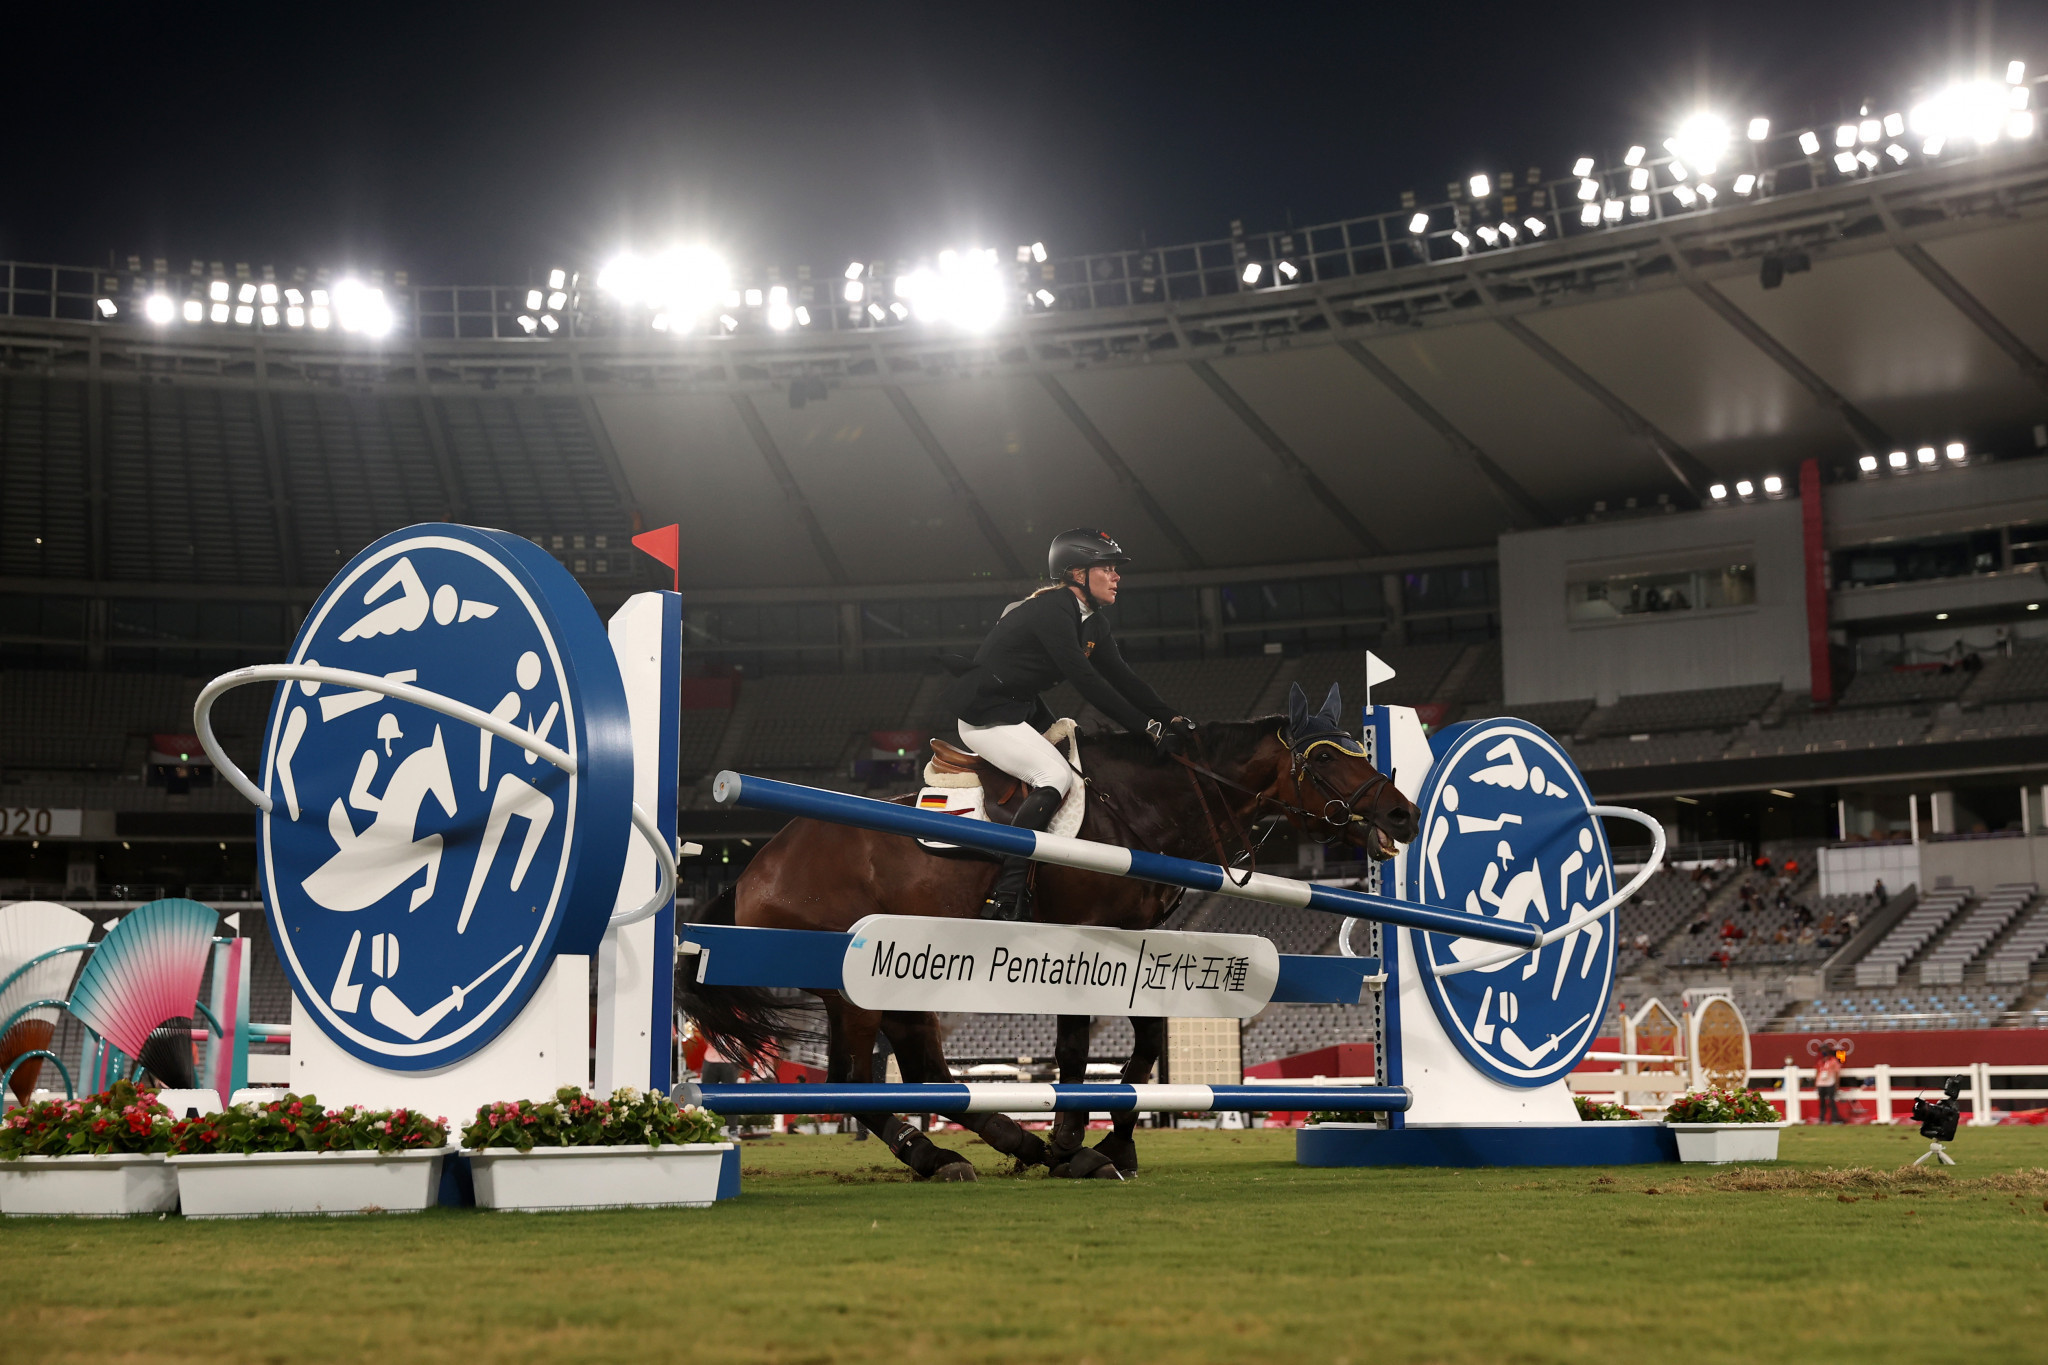 The UIPM has moved to get rid of the sport's equestrian element following a horse-abuse scandal at the Tokyo 2020 Olympics ©Getty Images